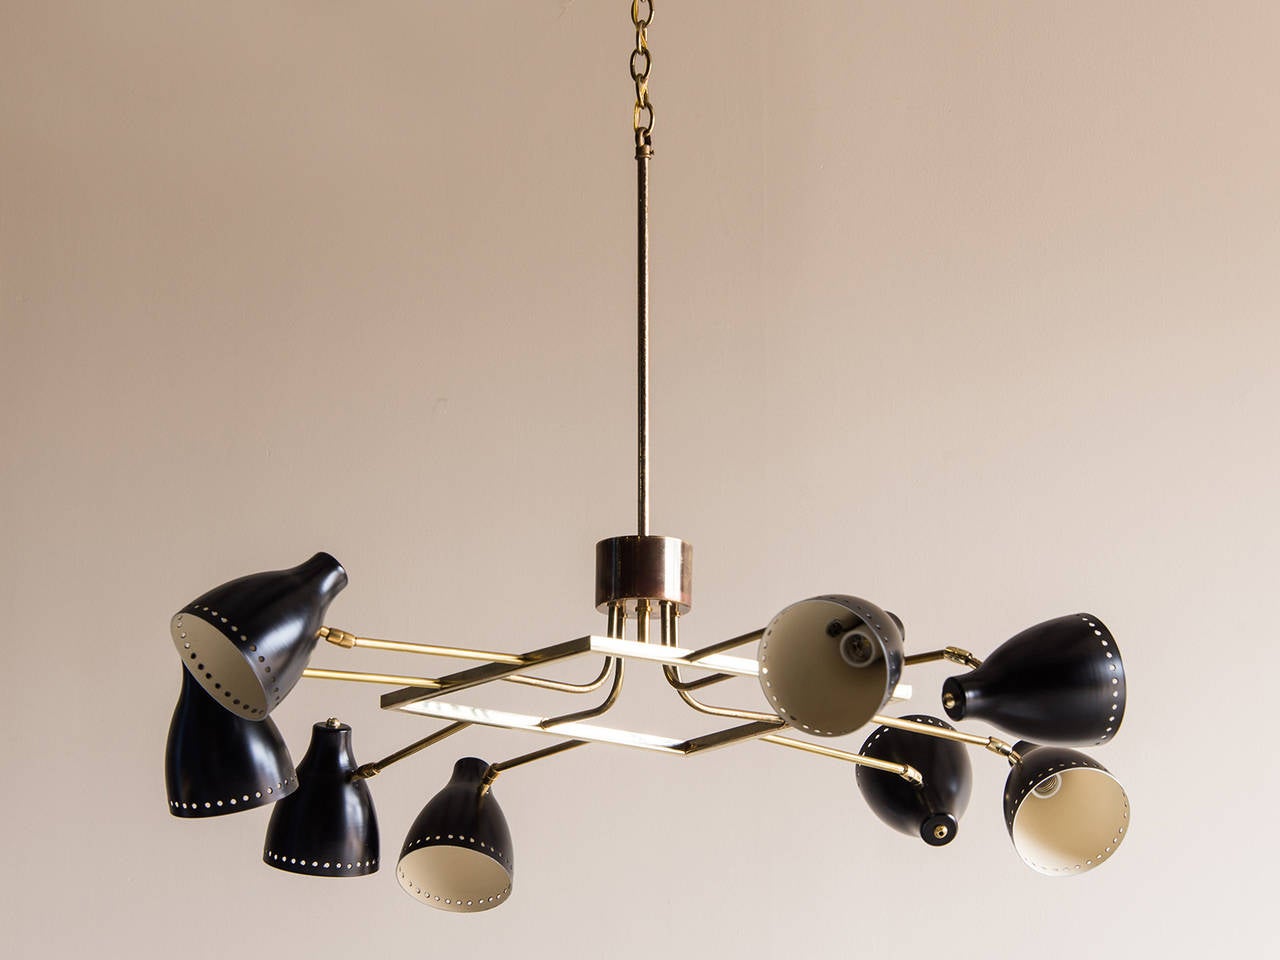 Vintage Mid-Century eight-arm square brass and steel chandelier from Italy, circa 1960. The unusual arrangement of the eight lights features two arms on each of the four sides with each black metal shade being able to pivot in a desired direction to